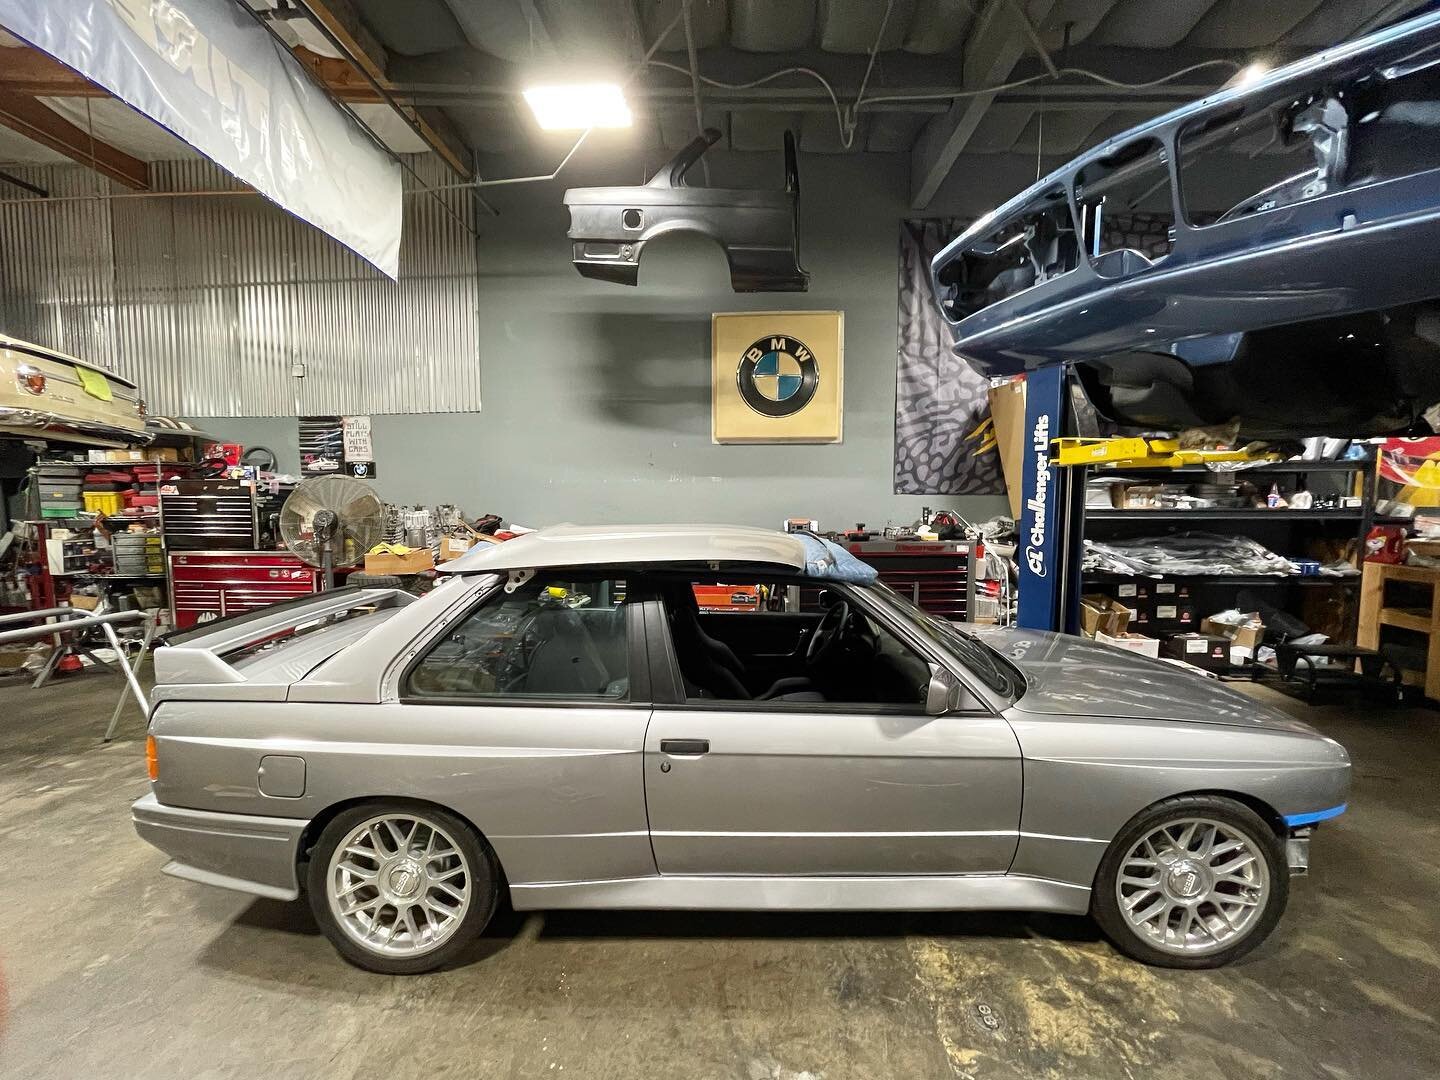 CAtuned.com 🌴 #catuned 
Almost ready after new paint, and much much more. #bmw #m3 #e30 #ultimateklasse #classic #restoration

Purchase our parts online / worldwide:
In CAnada: @deltaparkauto 
In Ukraine: @catunedua (Praying for 🕊)
In Germany: @cat